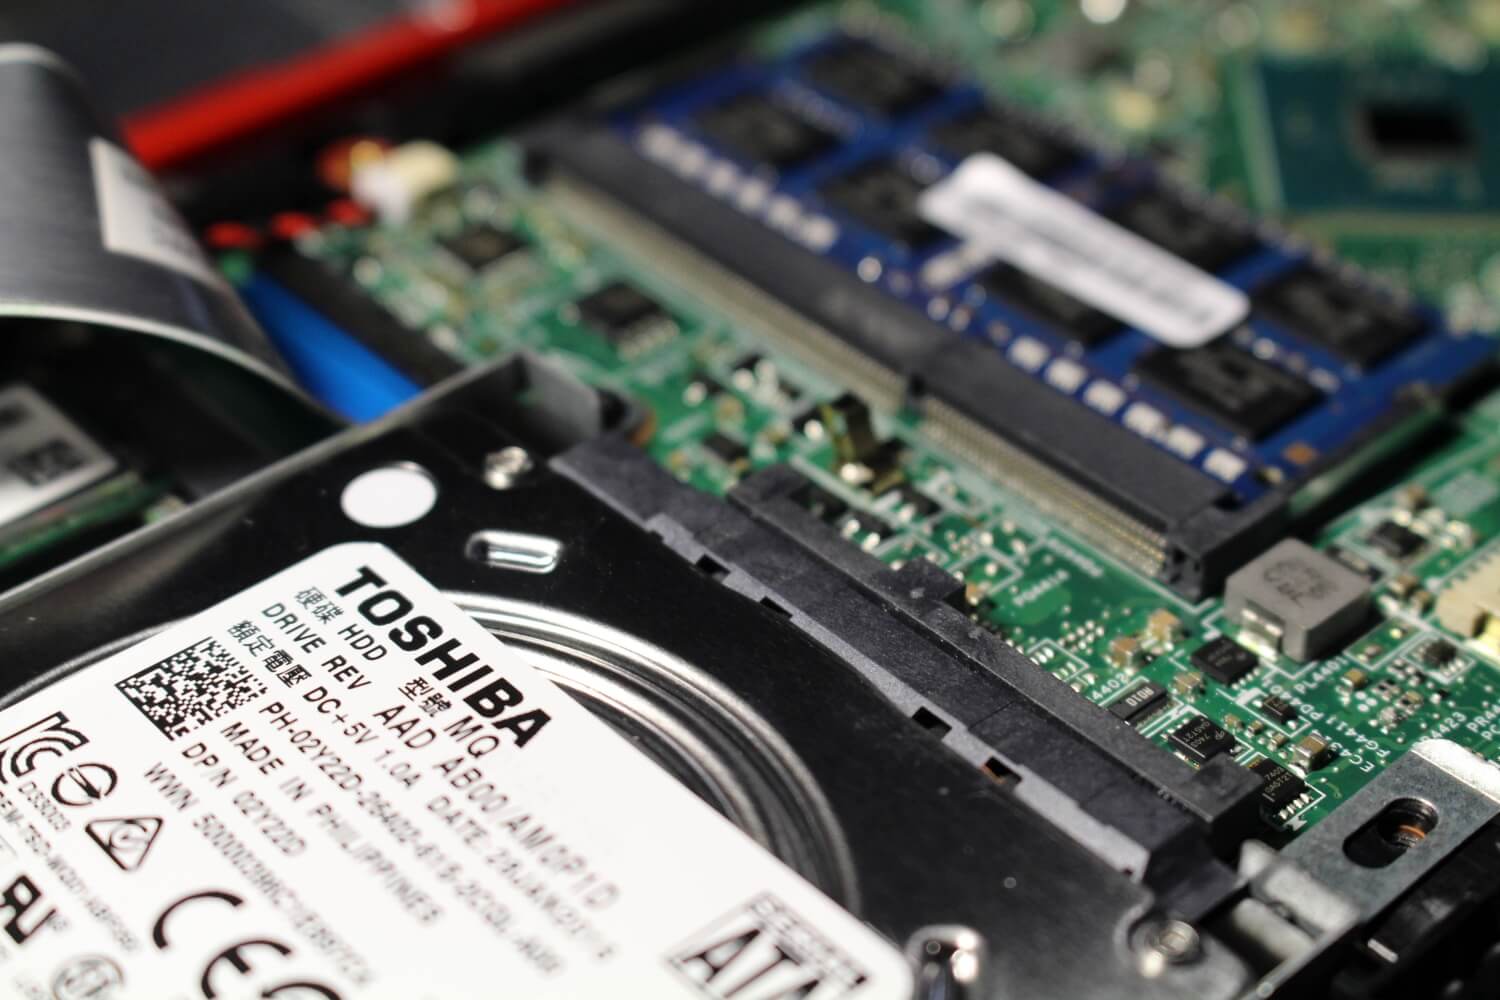 Toshiba reveals which of its hard drives use slower SMR technology